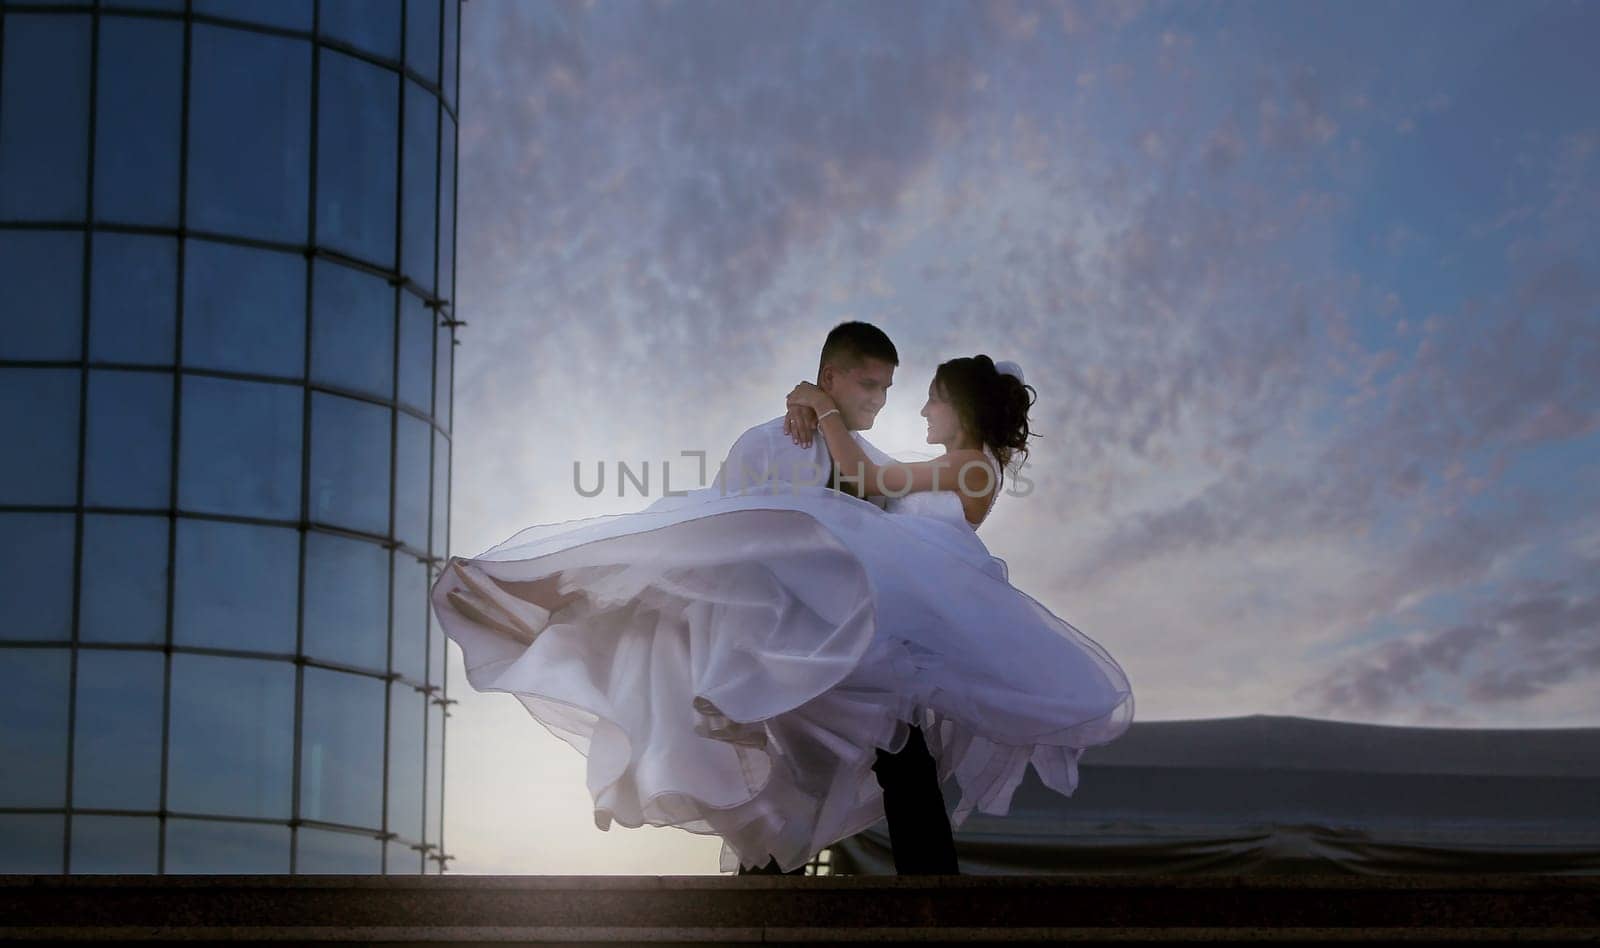 The groom circles his bride against the background of the sunset sky. High quality photo